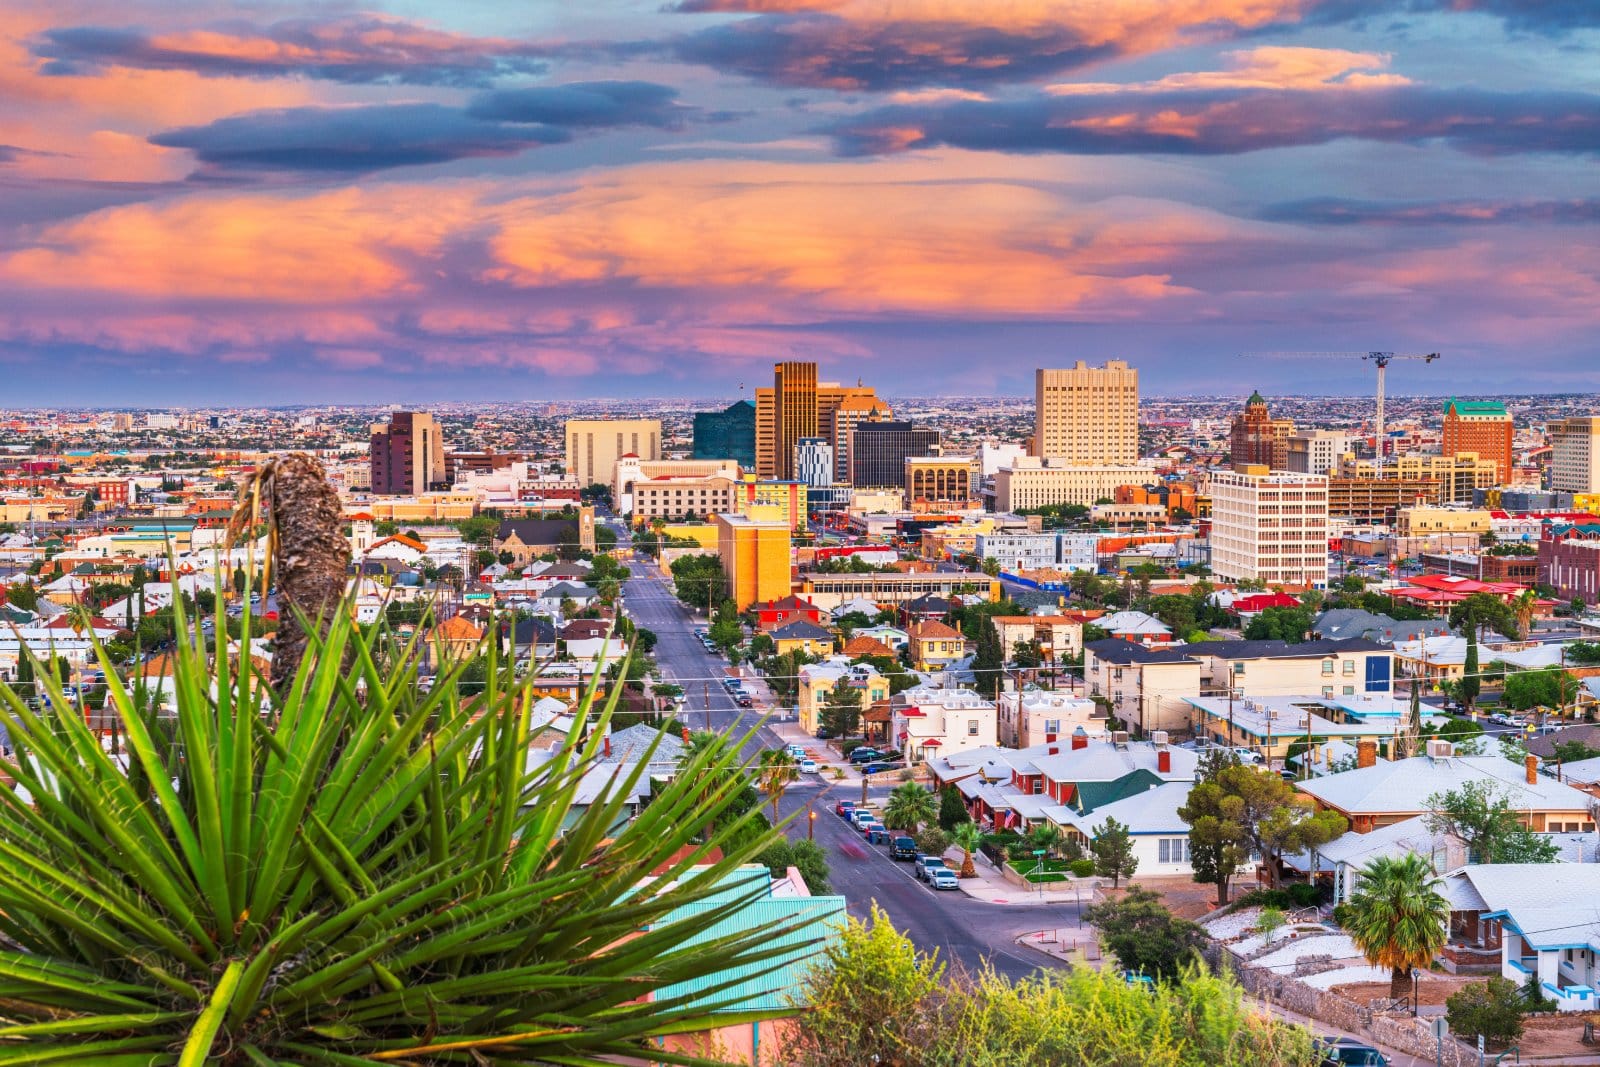 <p><b>Estimated Retirement Savings Needed: $800,000</b></p><p><span>Enjoy a warm climate, diverse culinary scene, and affordable housing market in El Paso, making it an appealing choice for retirees looking to stretch their savings.</span></p>